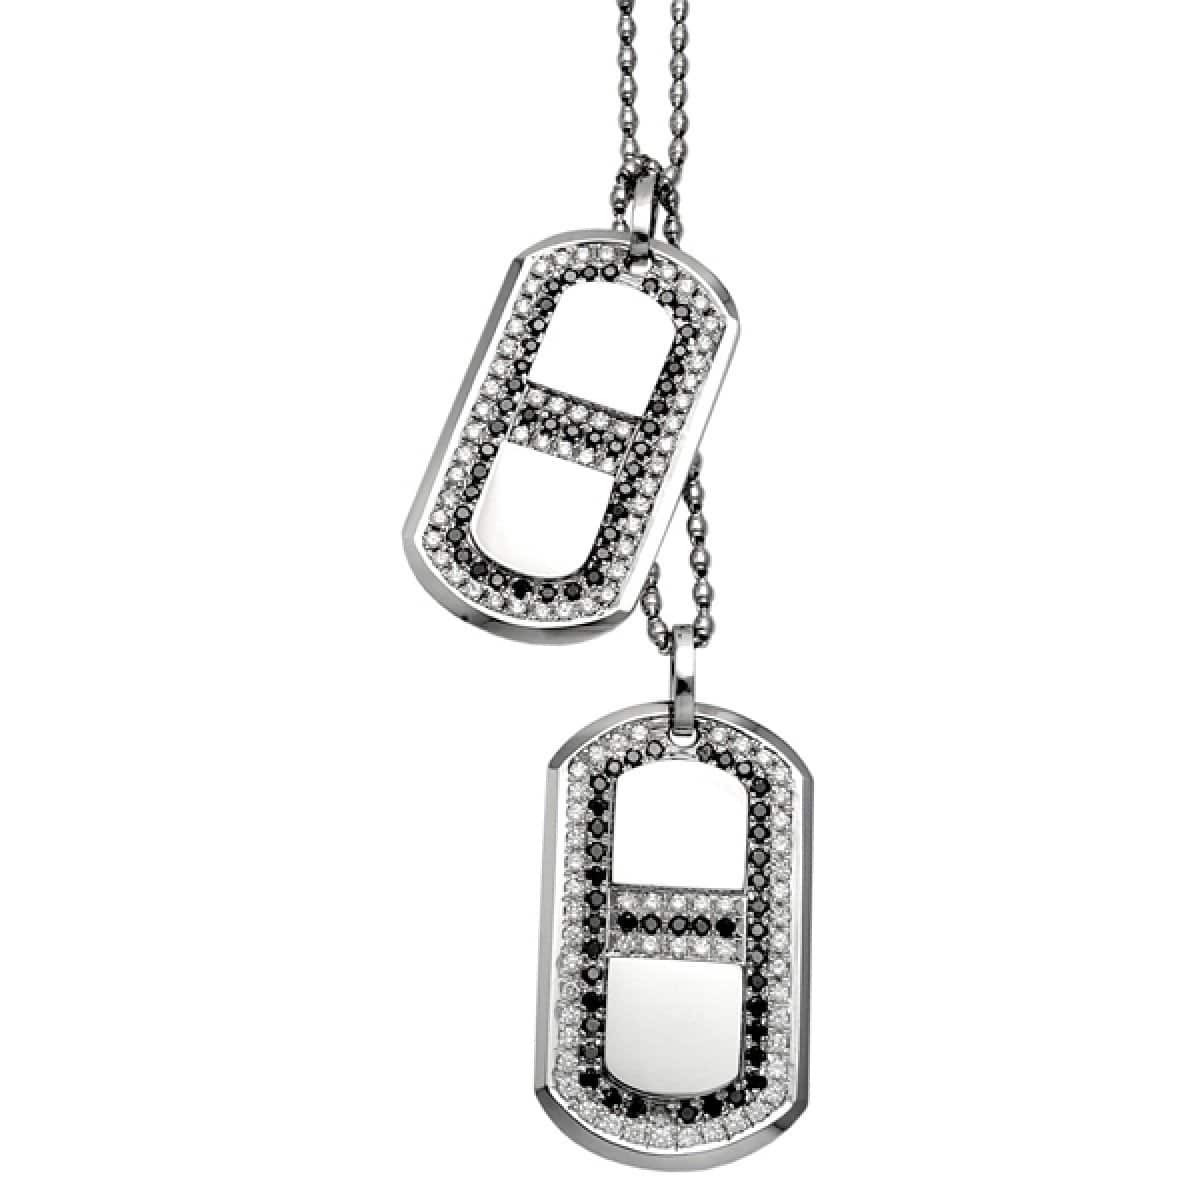 DOG TAGS - Chris Aire Fine Jewelry & Timepieces